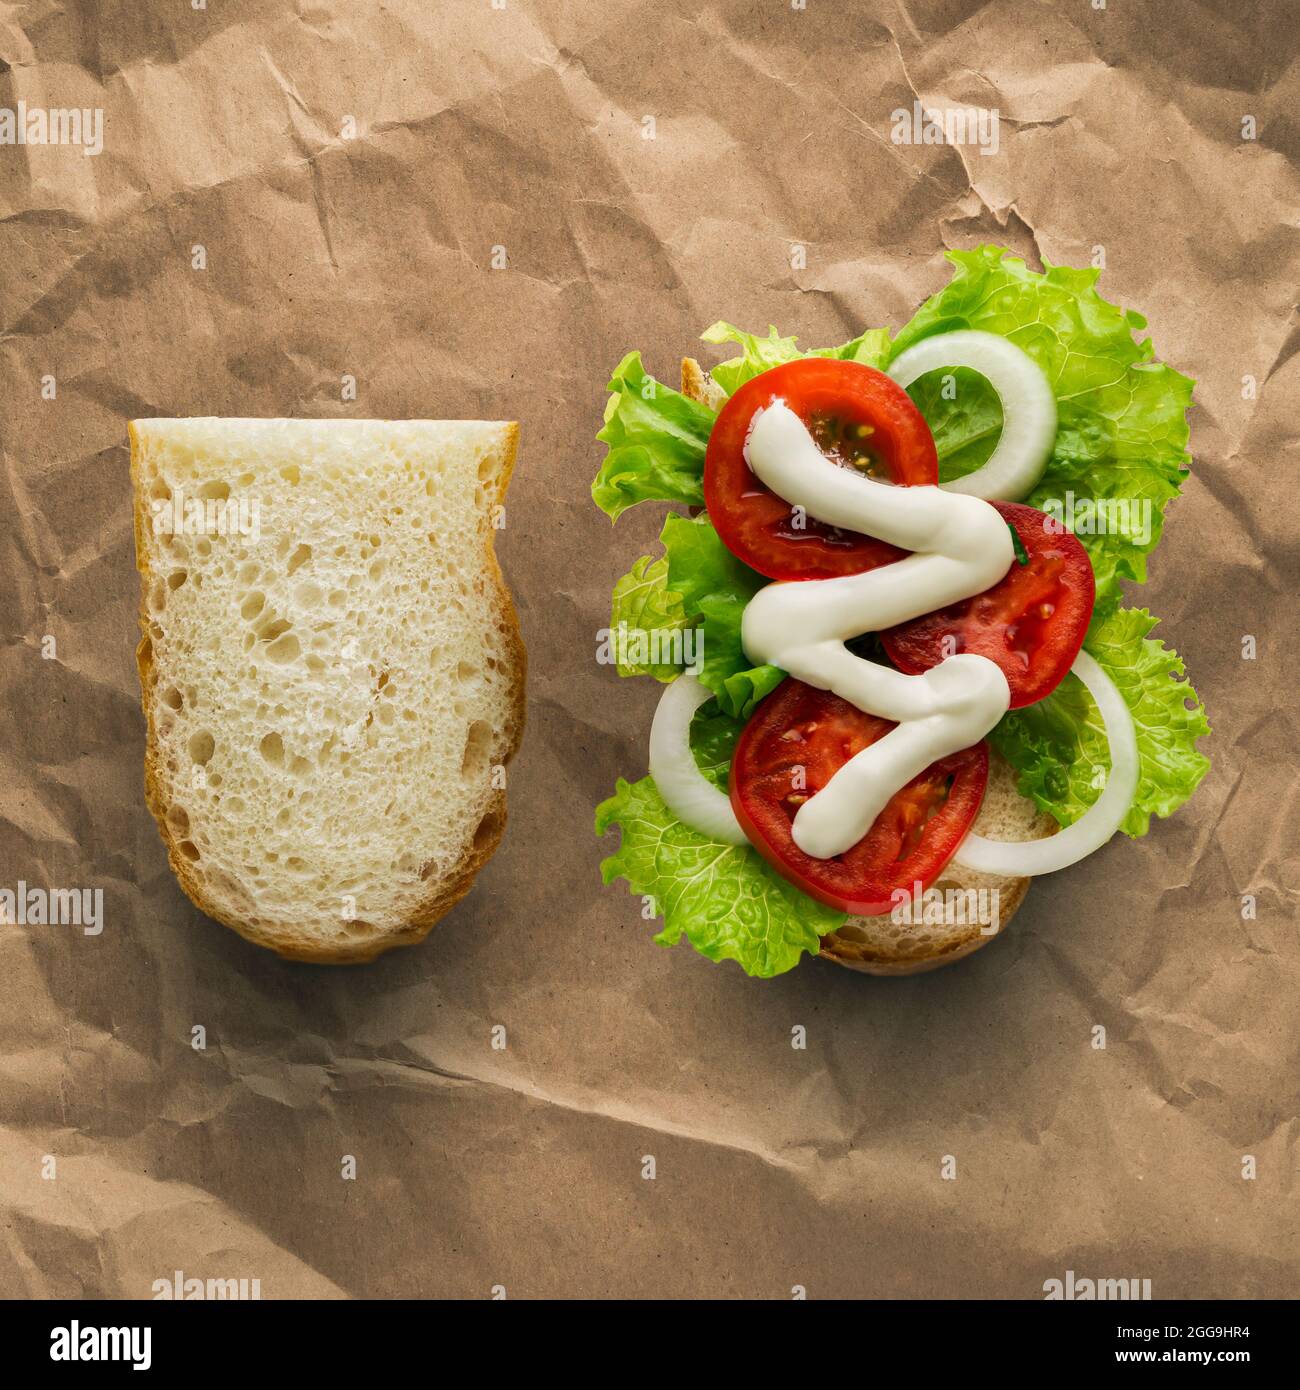 https://c8.alamy.com/comp/2GG9HR4/vegetarian-sandwich-with-bread-tomatoes-and-onions-with-a-bun-on-craft-paper-wrap-up-a-light-breakfast-and-take-it-with-you-to-school-or-to-work-sa-2GG9HR4.jpg